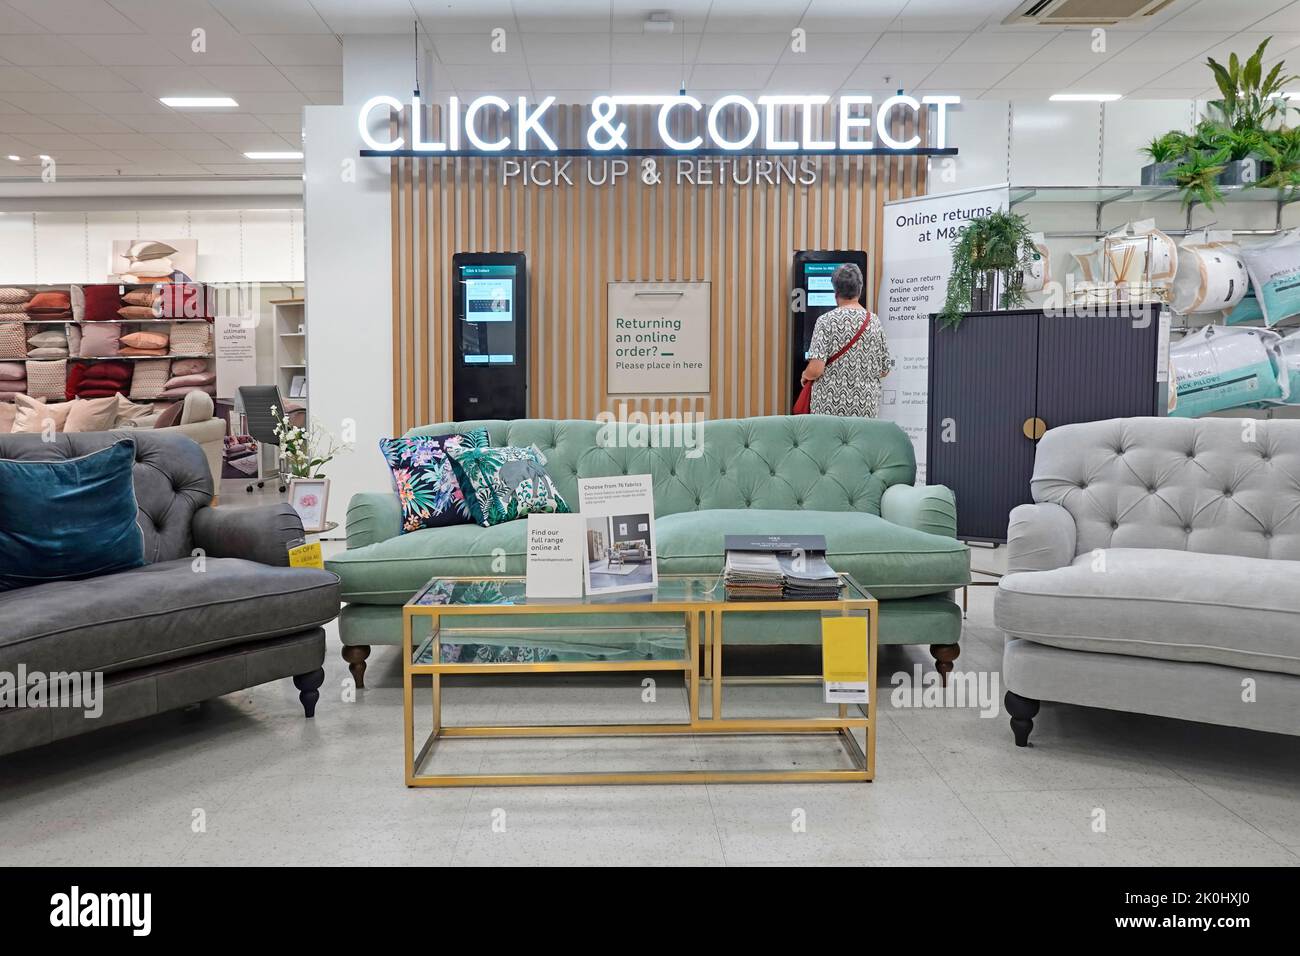 M&S customer Click & Collect pick up & returns facility with furniture display in large Marks and Spencer retail shopping business store in England UK Stock Photo